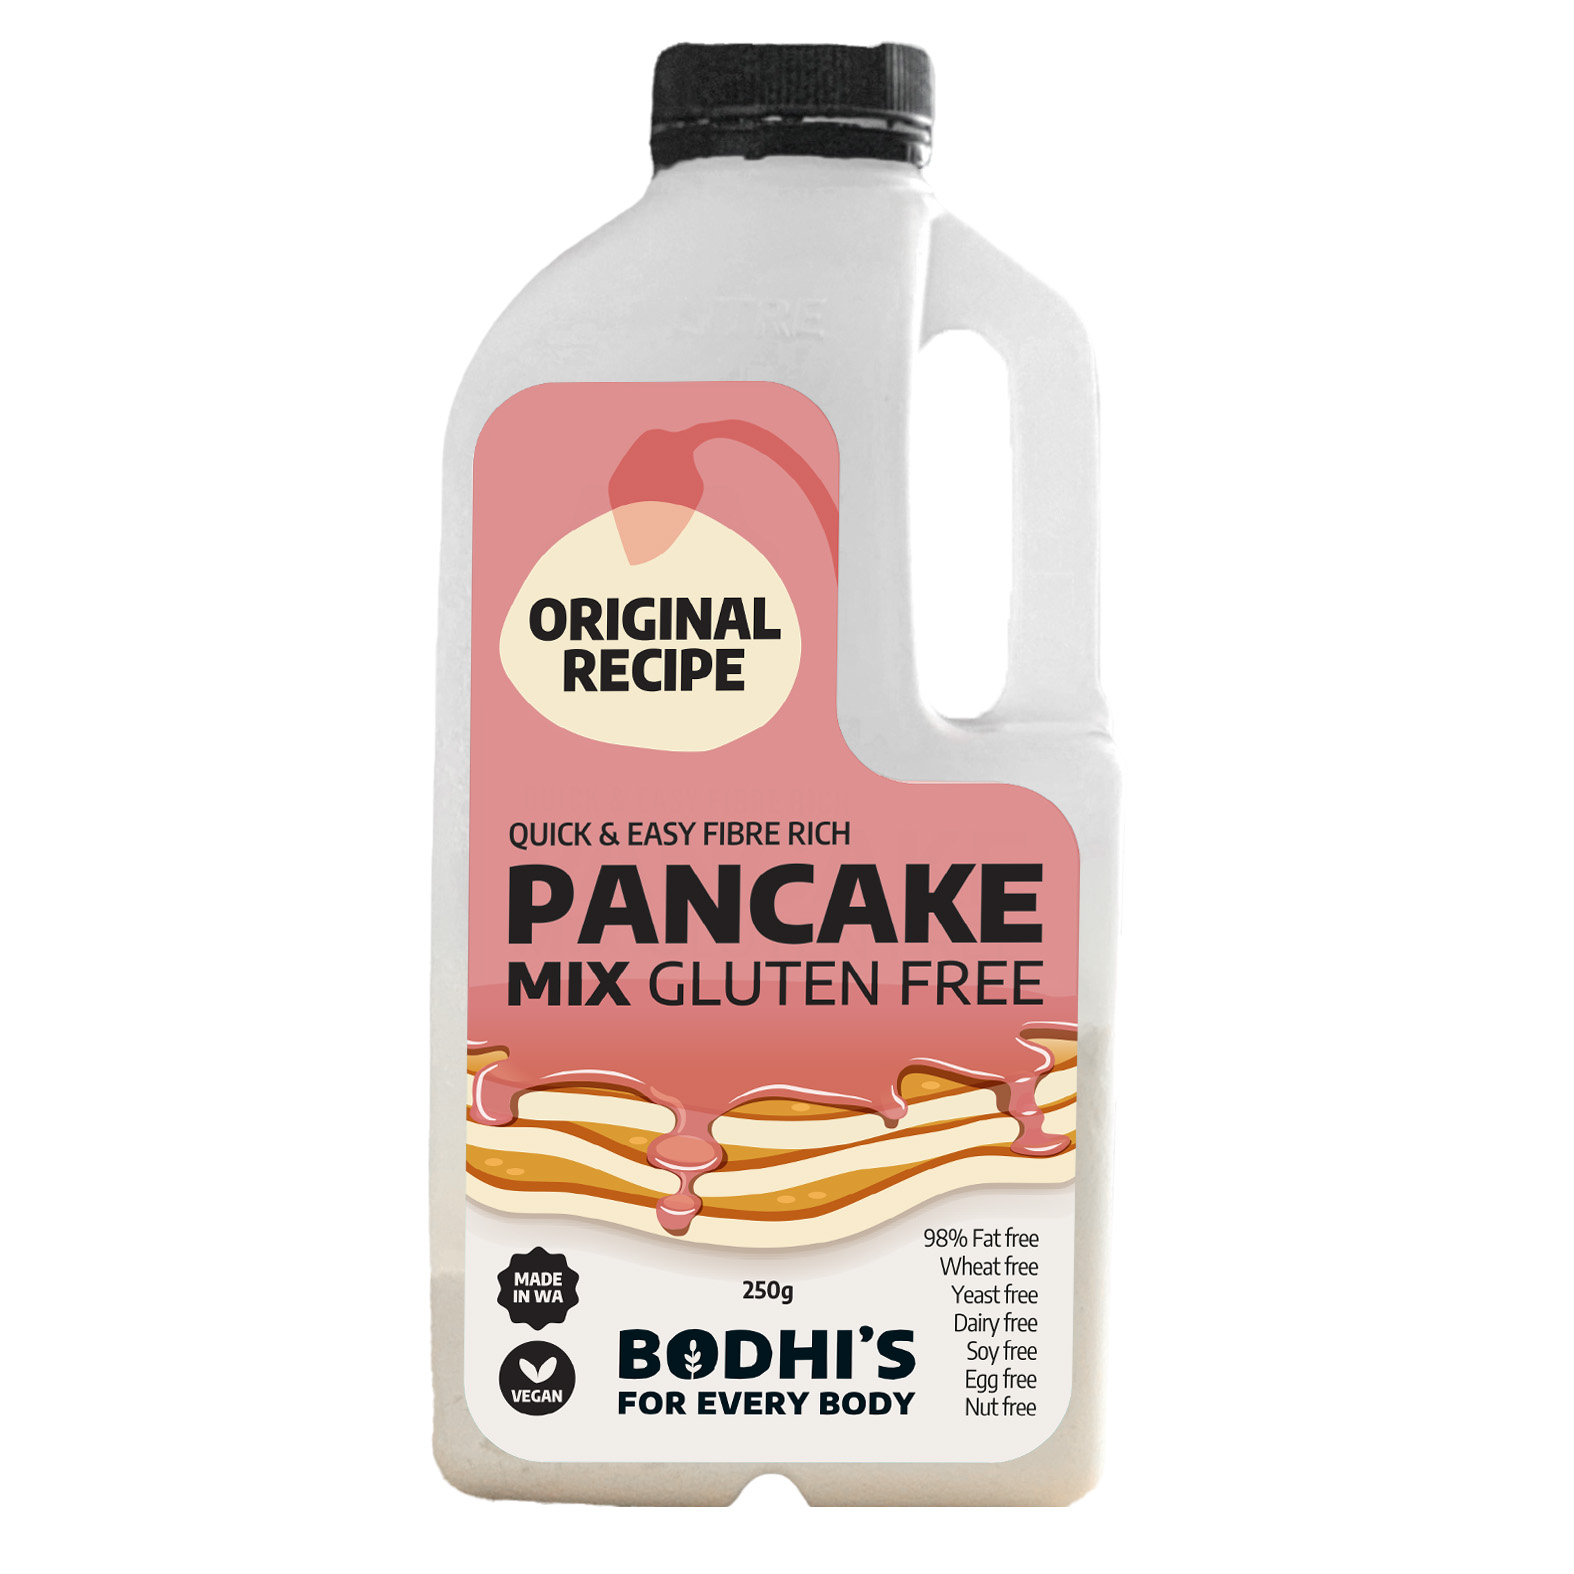 A photo of Bodhi's Gluten Free Original Fibre Rich pancake mix in an easy mix bottle - add liquid, shake and cook.